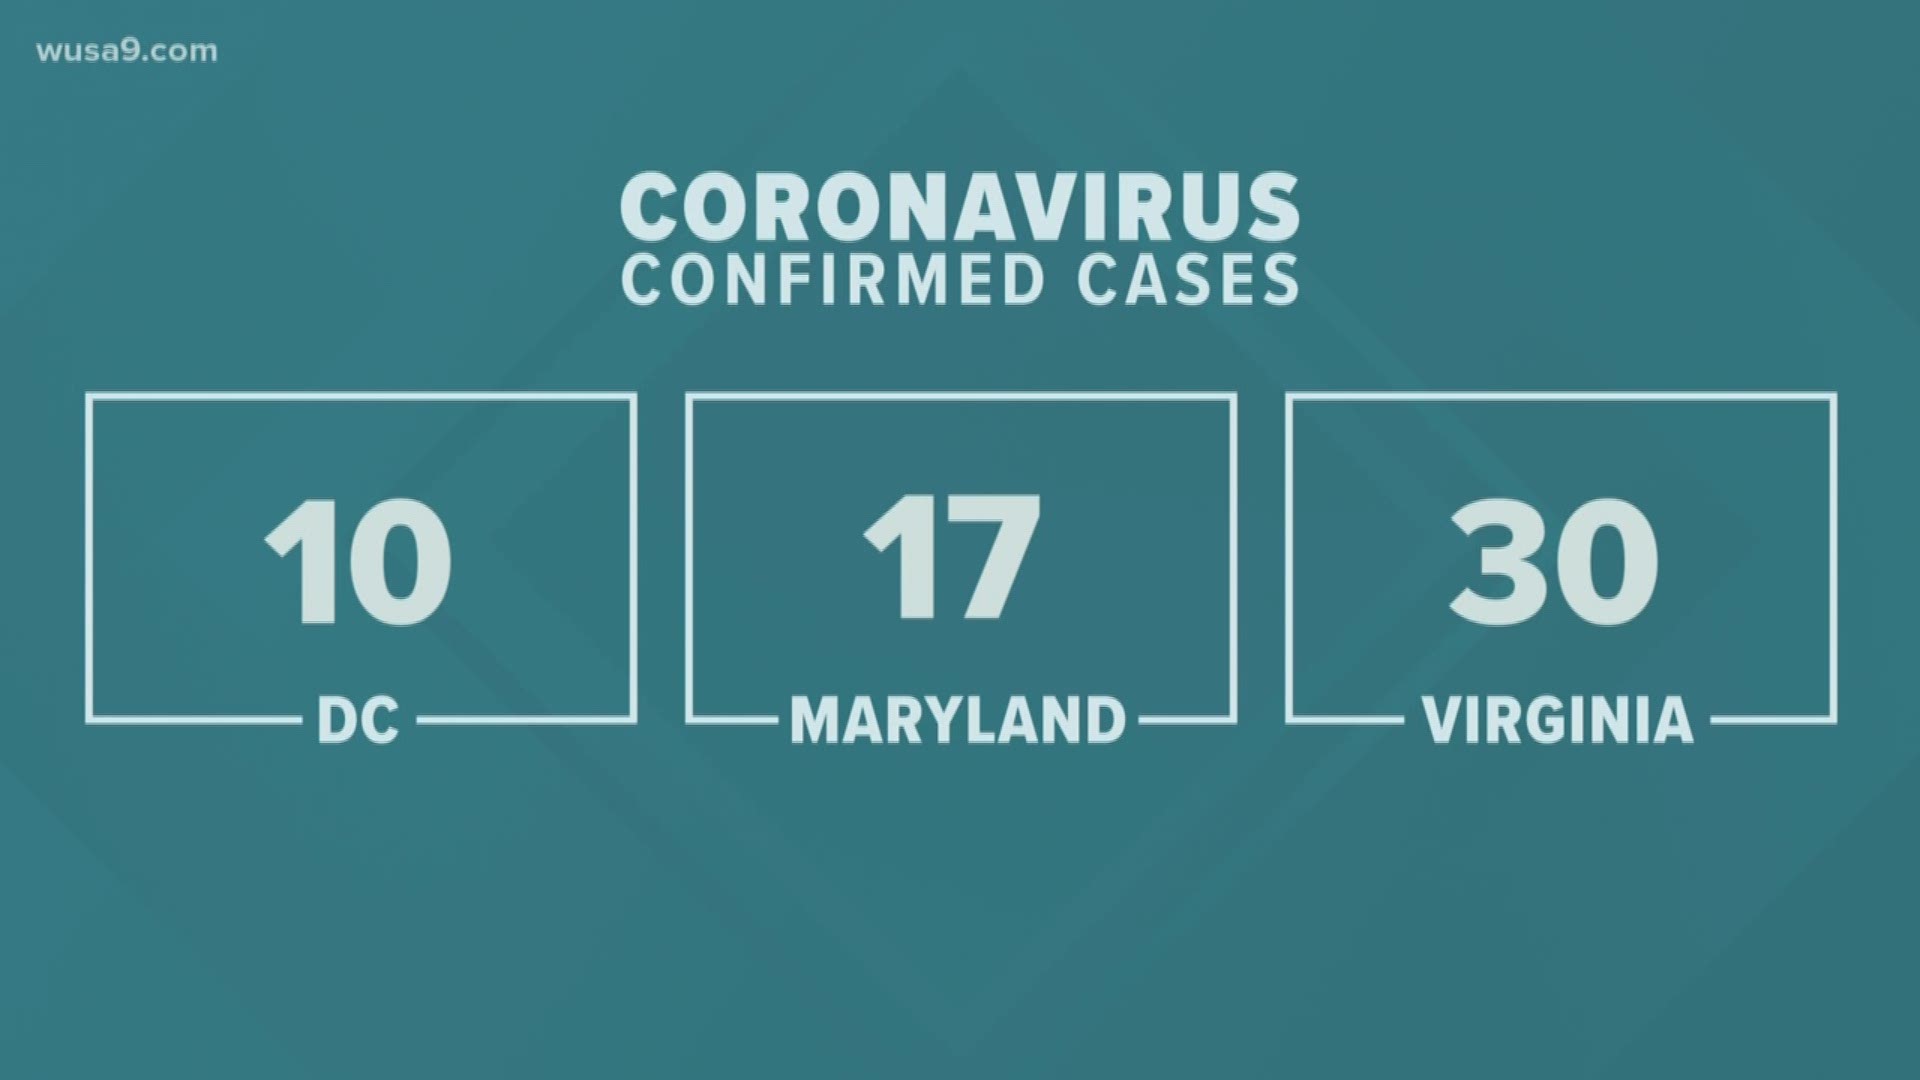 There are 57 people throughout D.C., MD and VA who have the coronavirus.